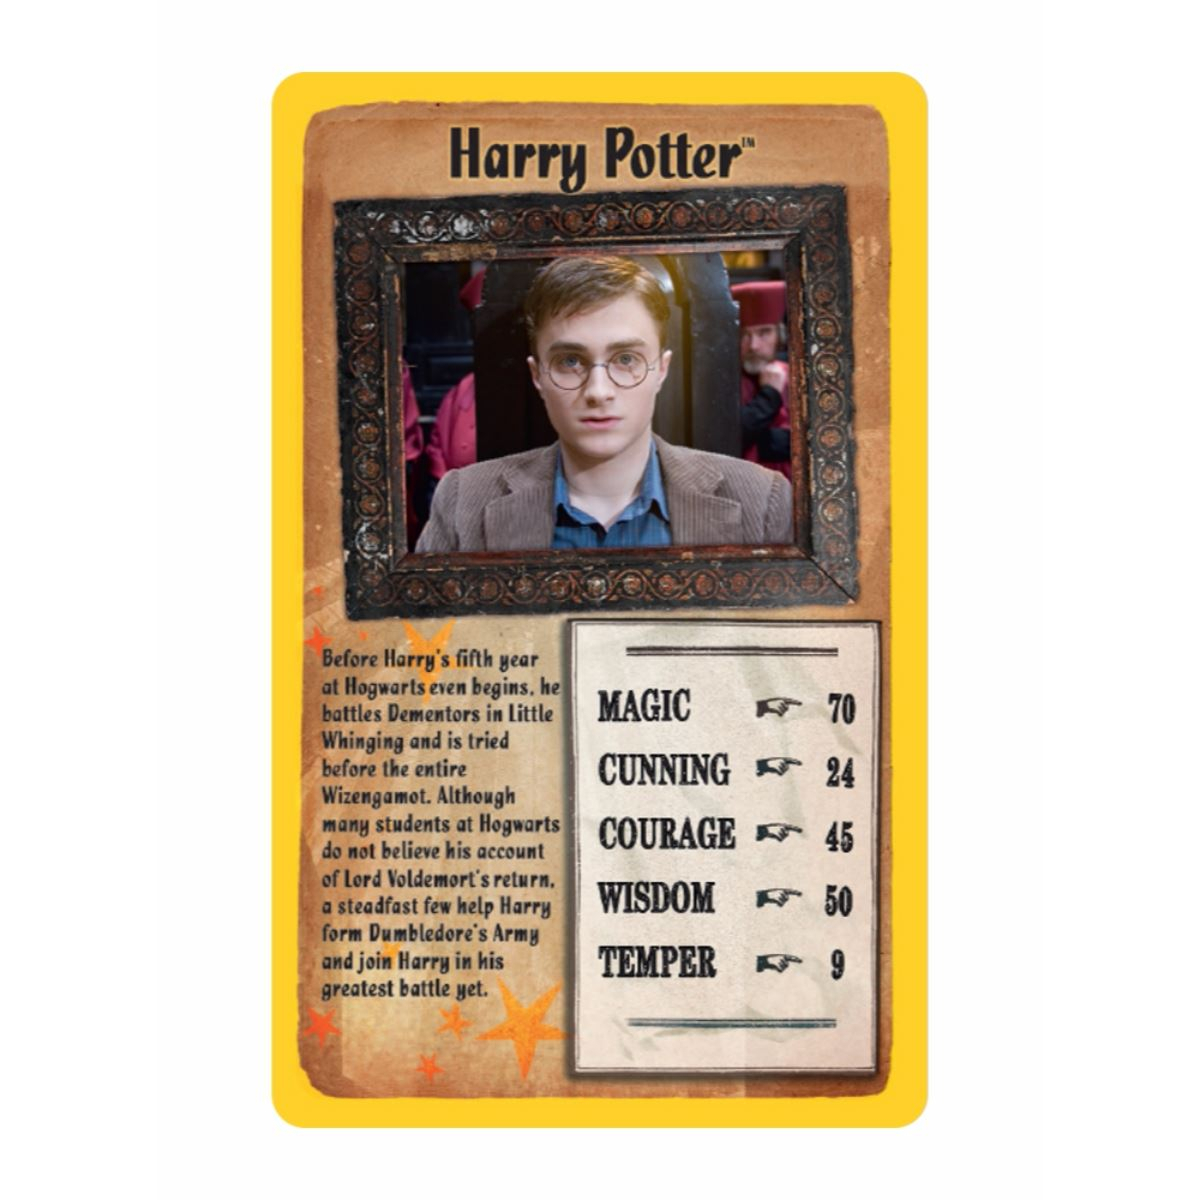 Details About Harry Potter And The Order Of The Phoenix Top Trumps Card Game With Regard To Top Trump Card Template